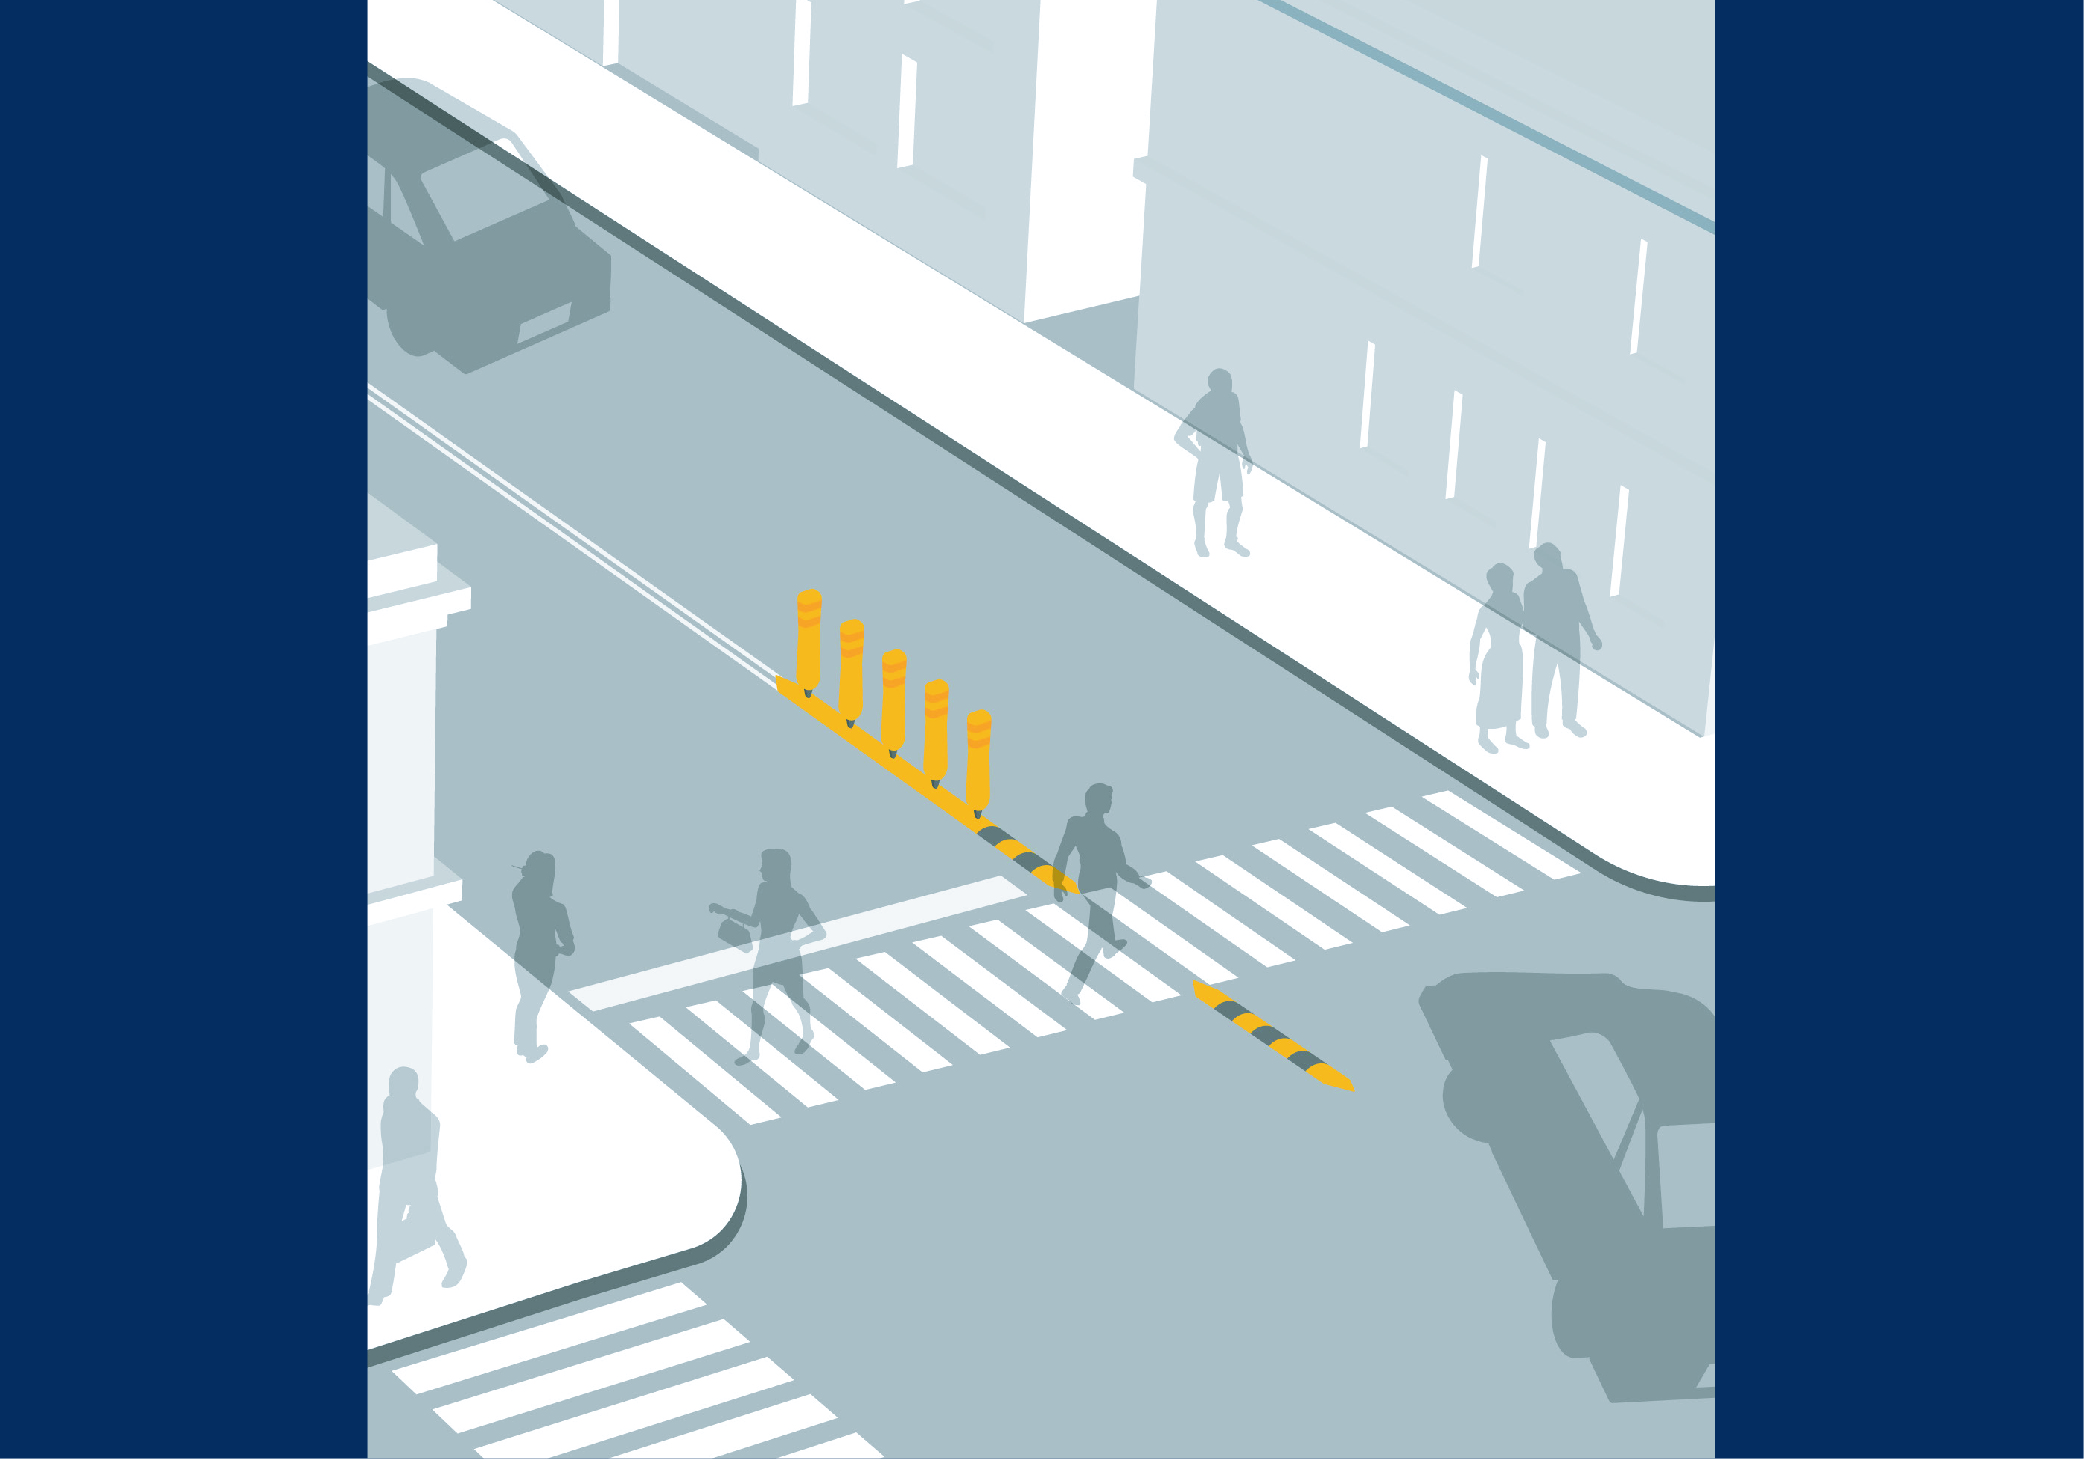 Rendering of  person crossing street with hardened centerline